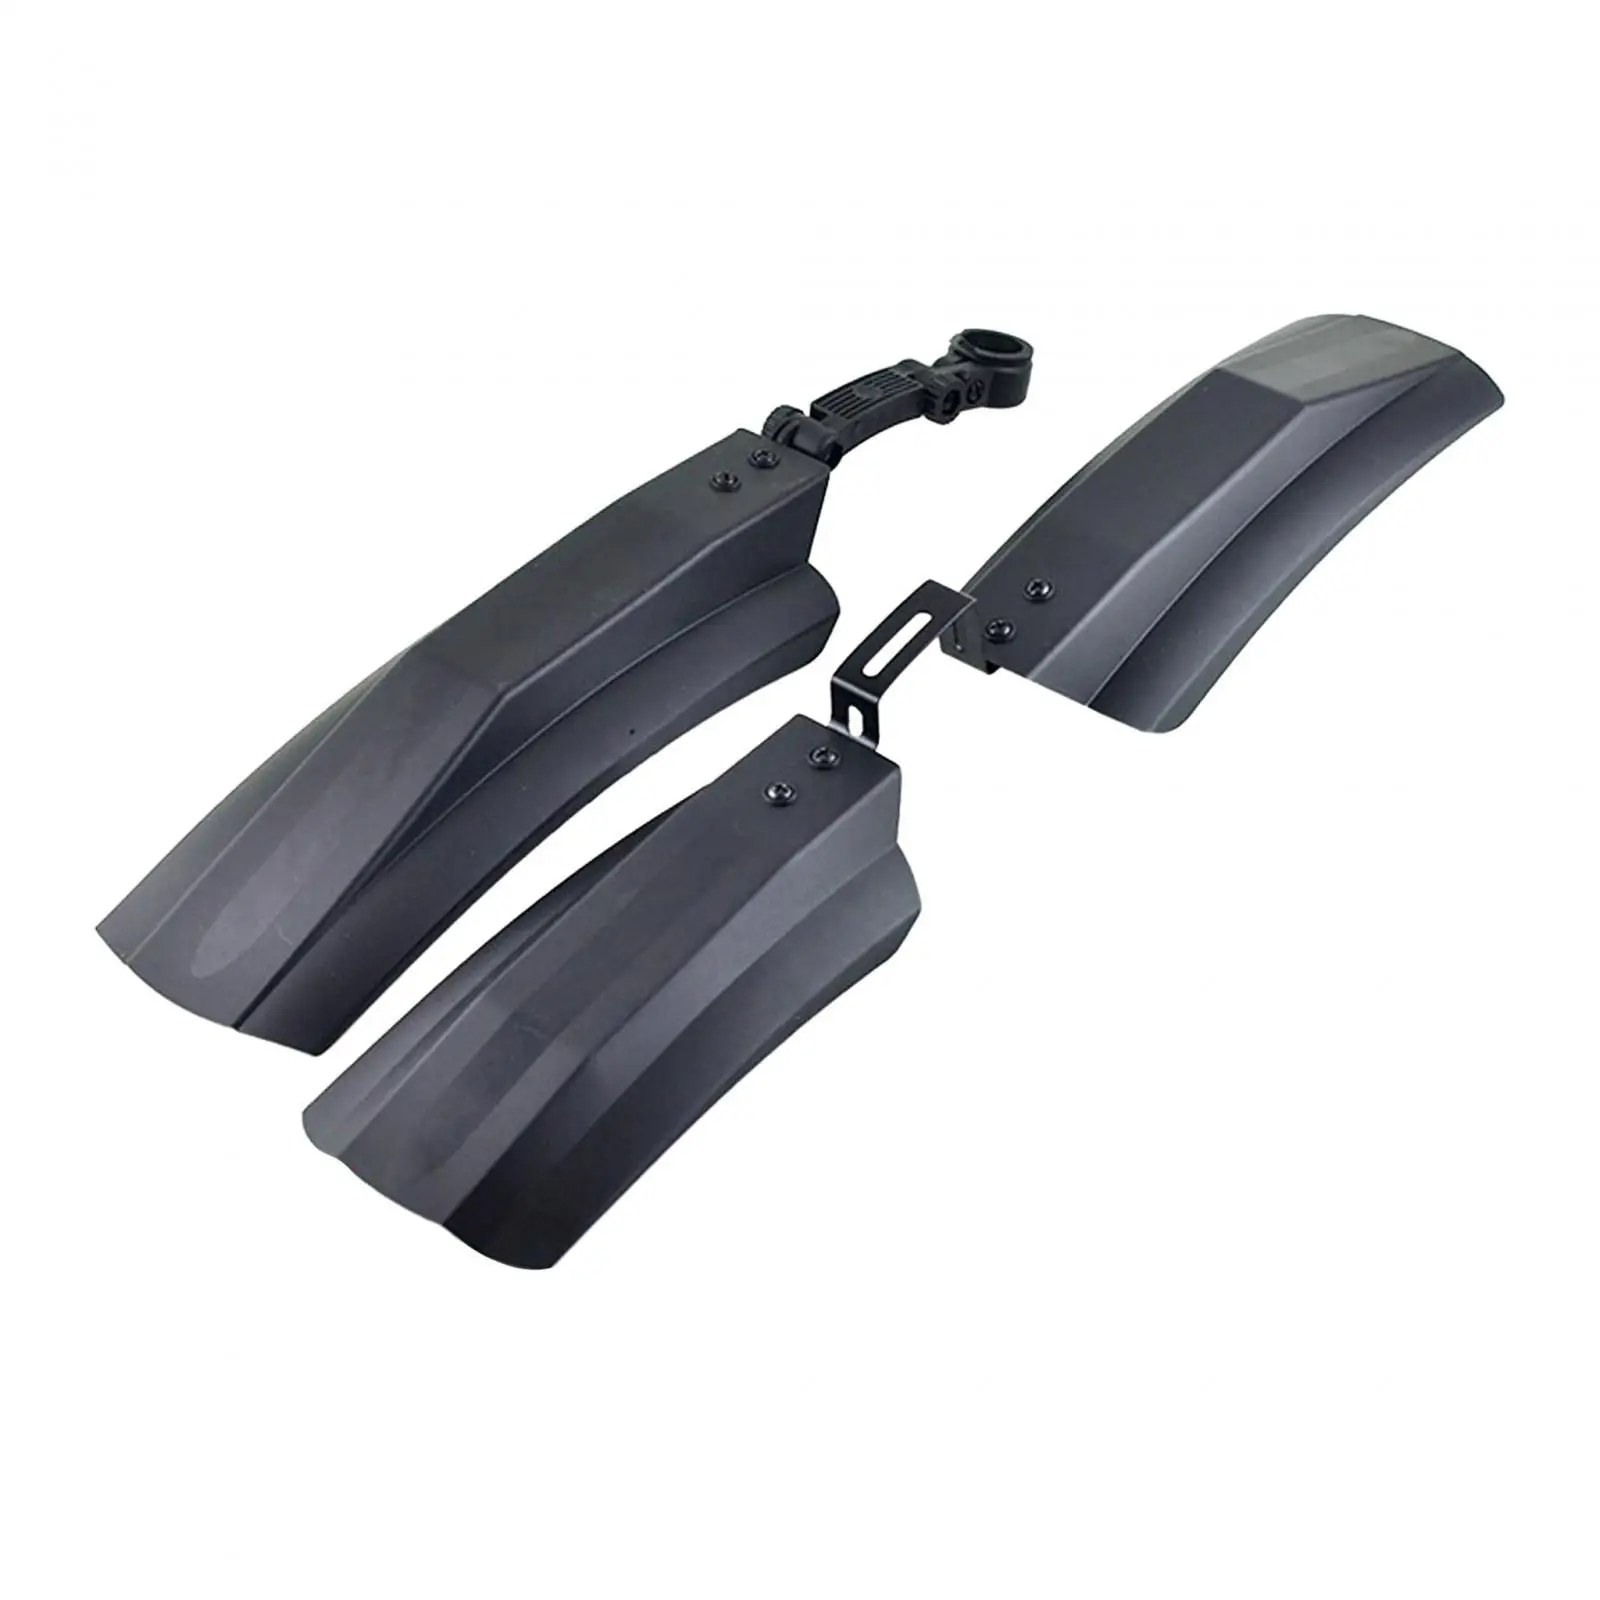 Bike Fenders Front and Rear Lengthen Widen Black Bicycle Tire Mudguard for Mountain Bikes Bike Traveling Snow Bikes Riding